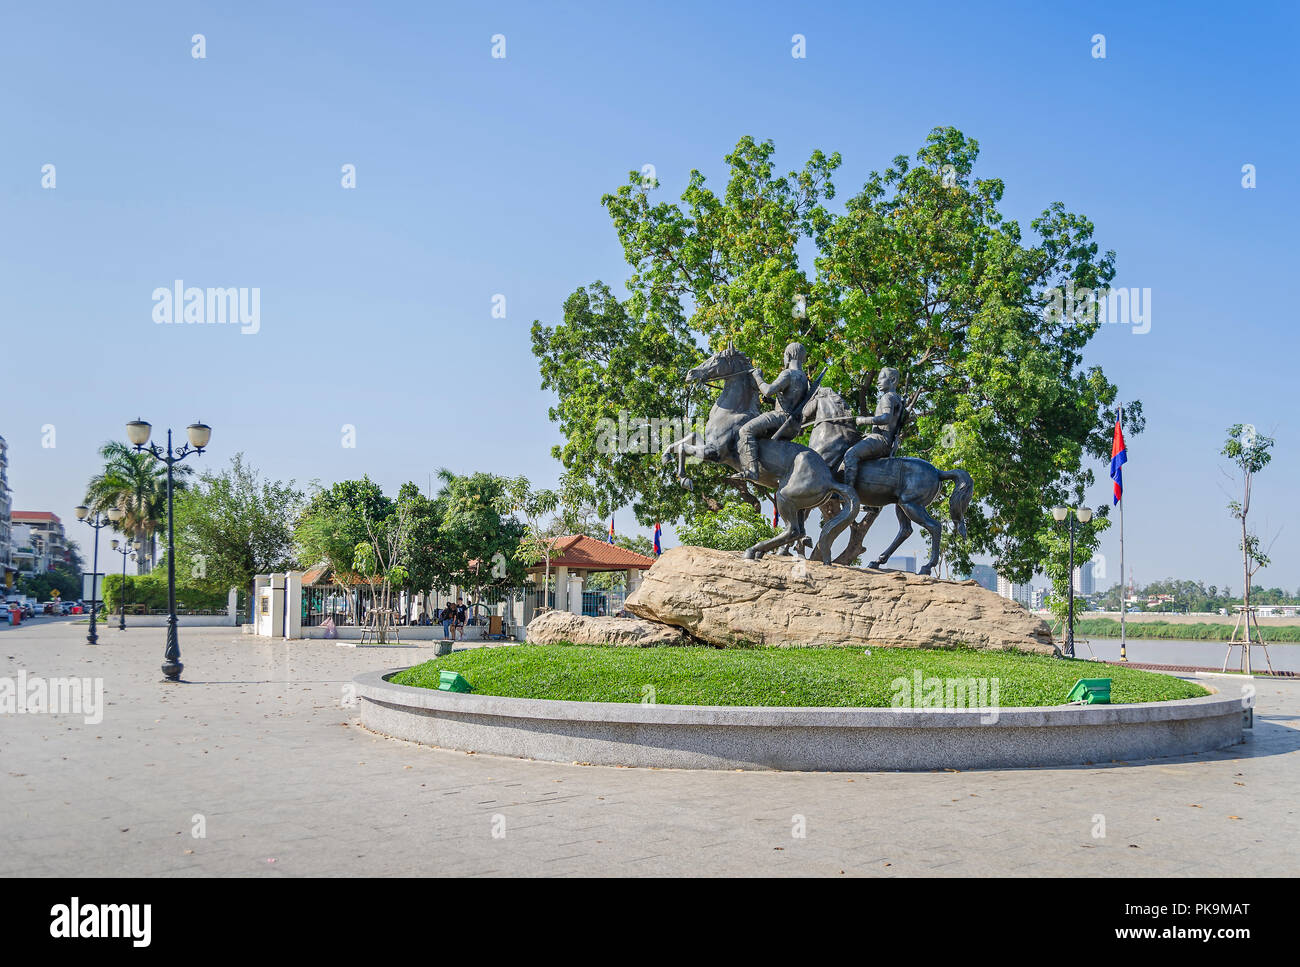 Phnom Penh, Cambodia - April 9, 2018: View of the Preah Sisowath Quay with the horse monument to the warriors Techo Meas and Techo Yot and flags Stock Photo